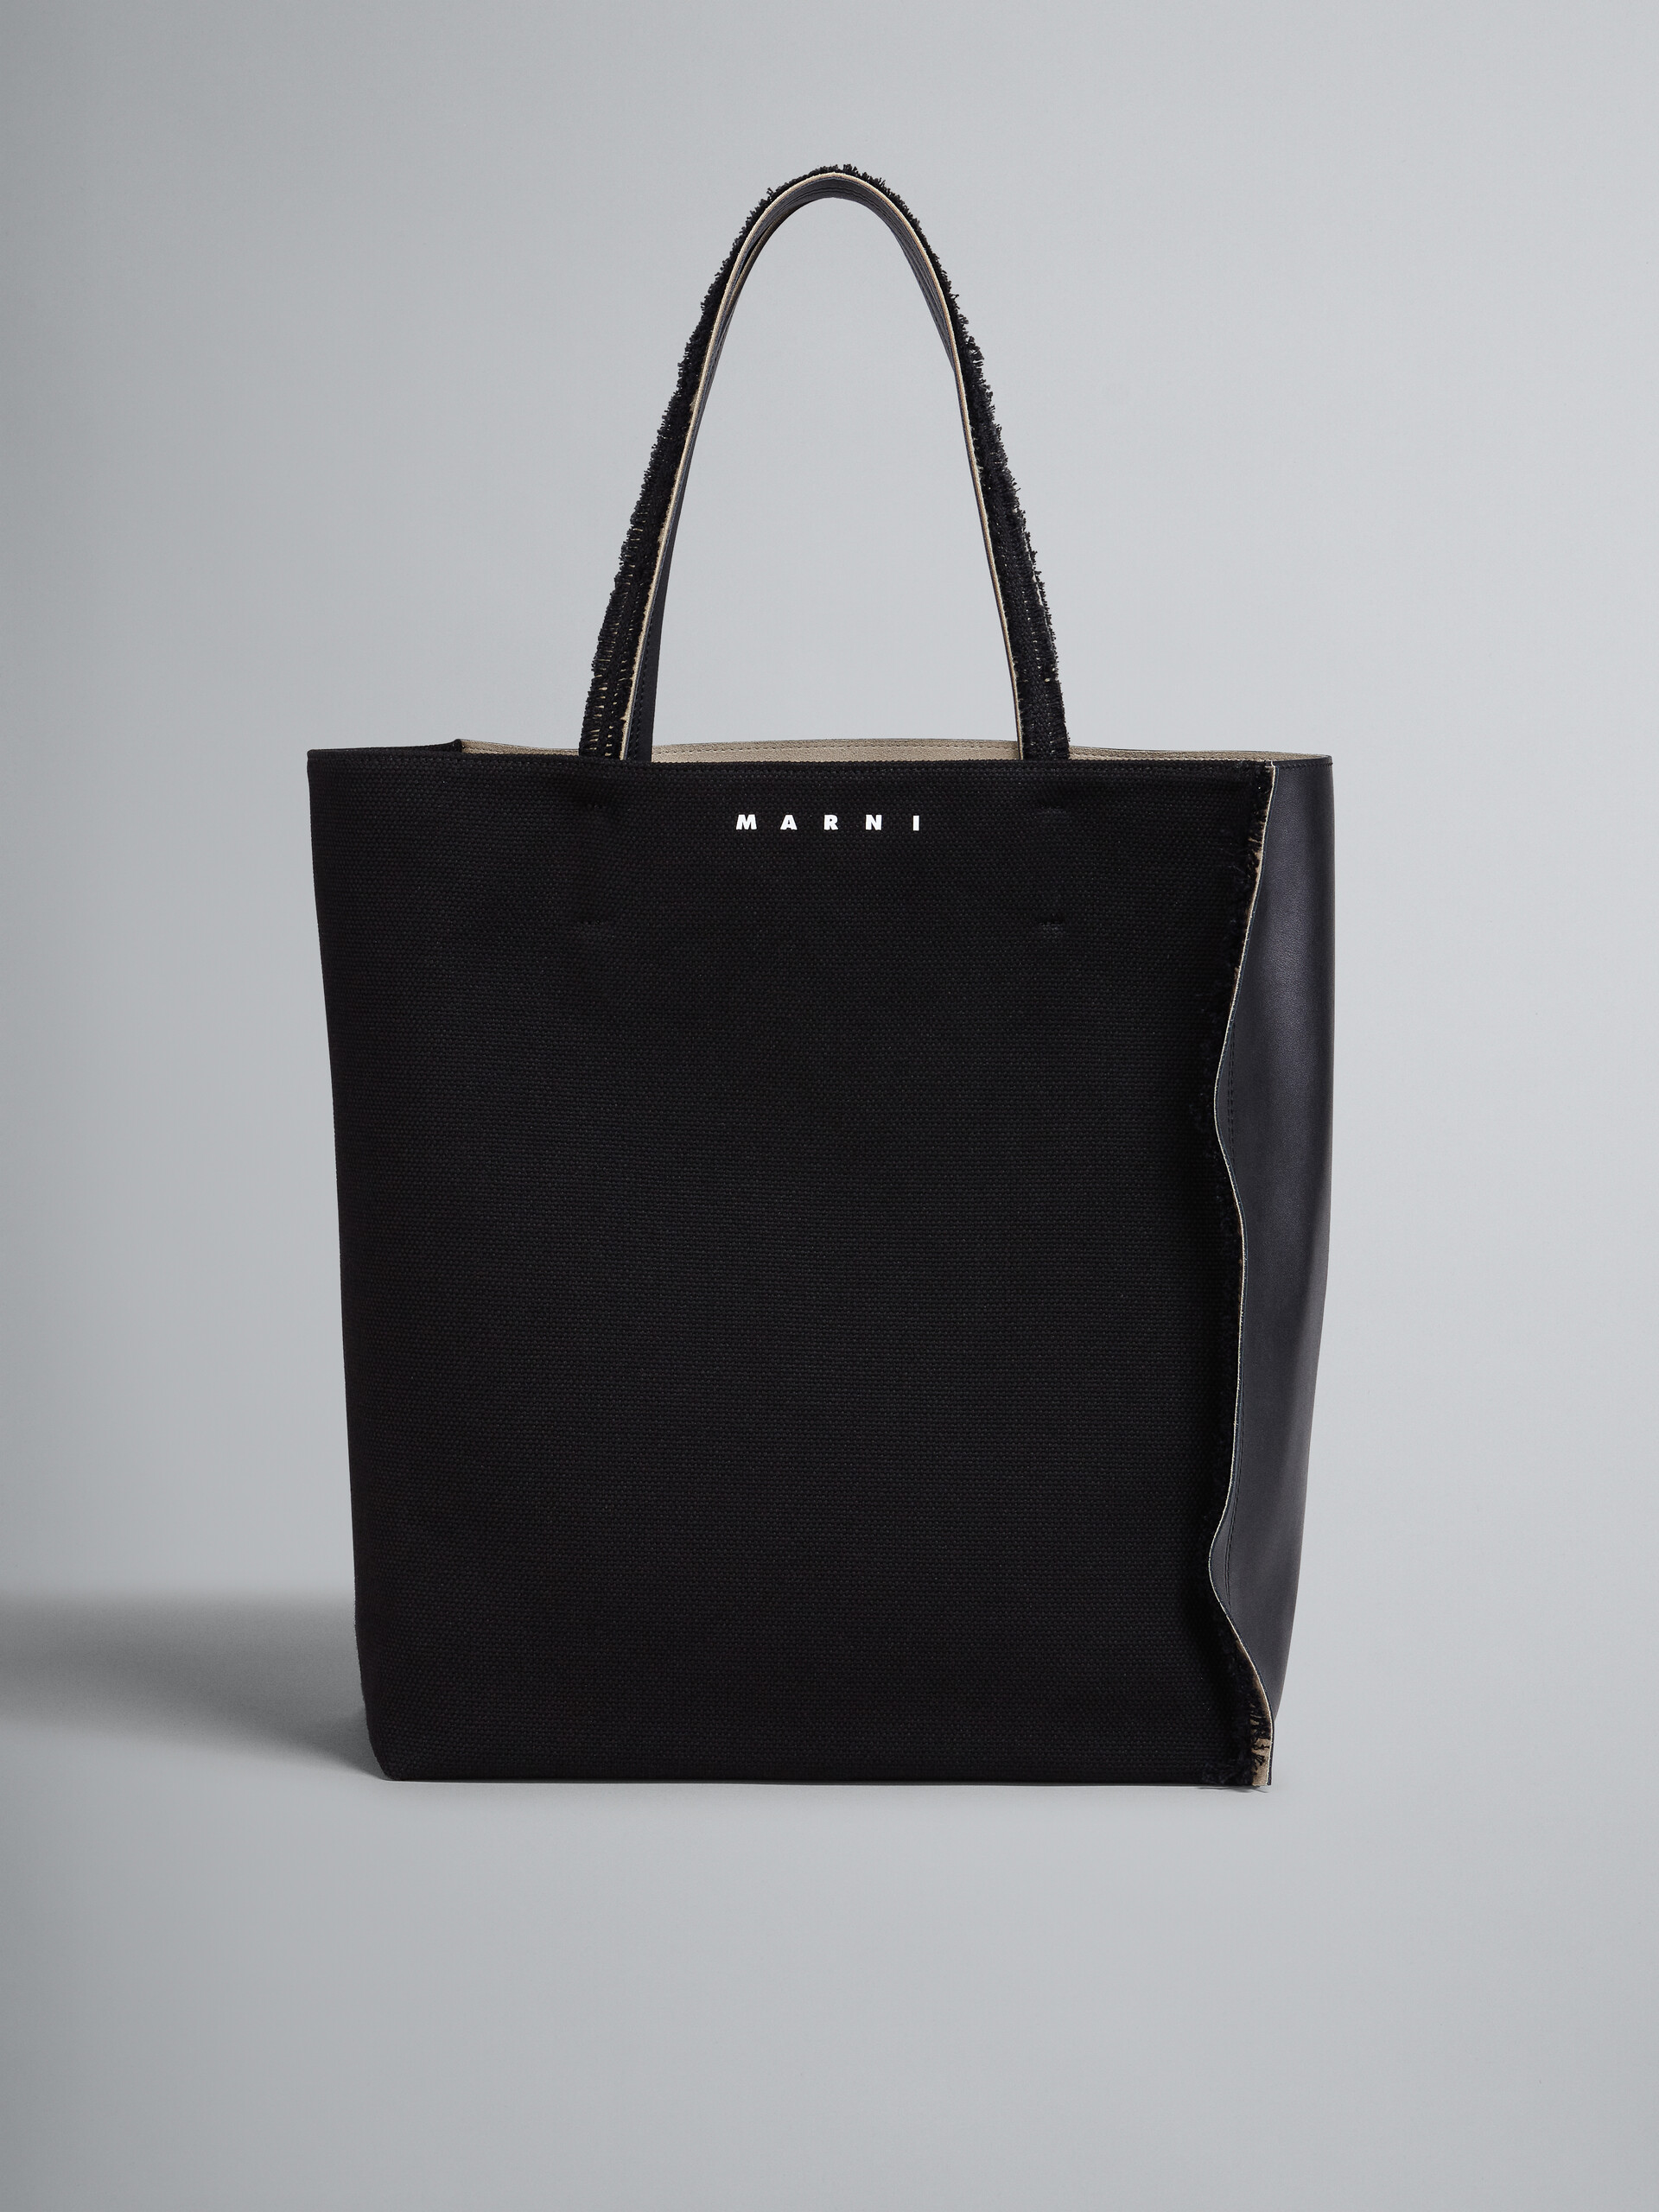 MUSEO SOFT large bag in black leather and canvas - Shopping Bags - Image 1